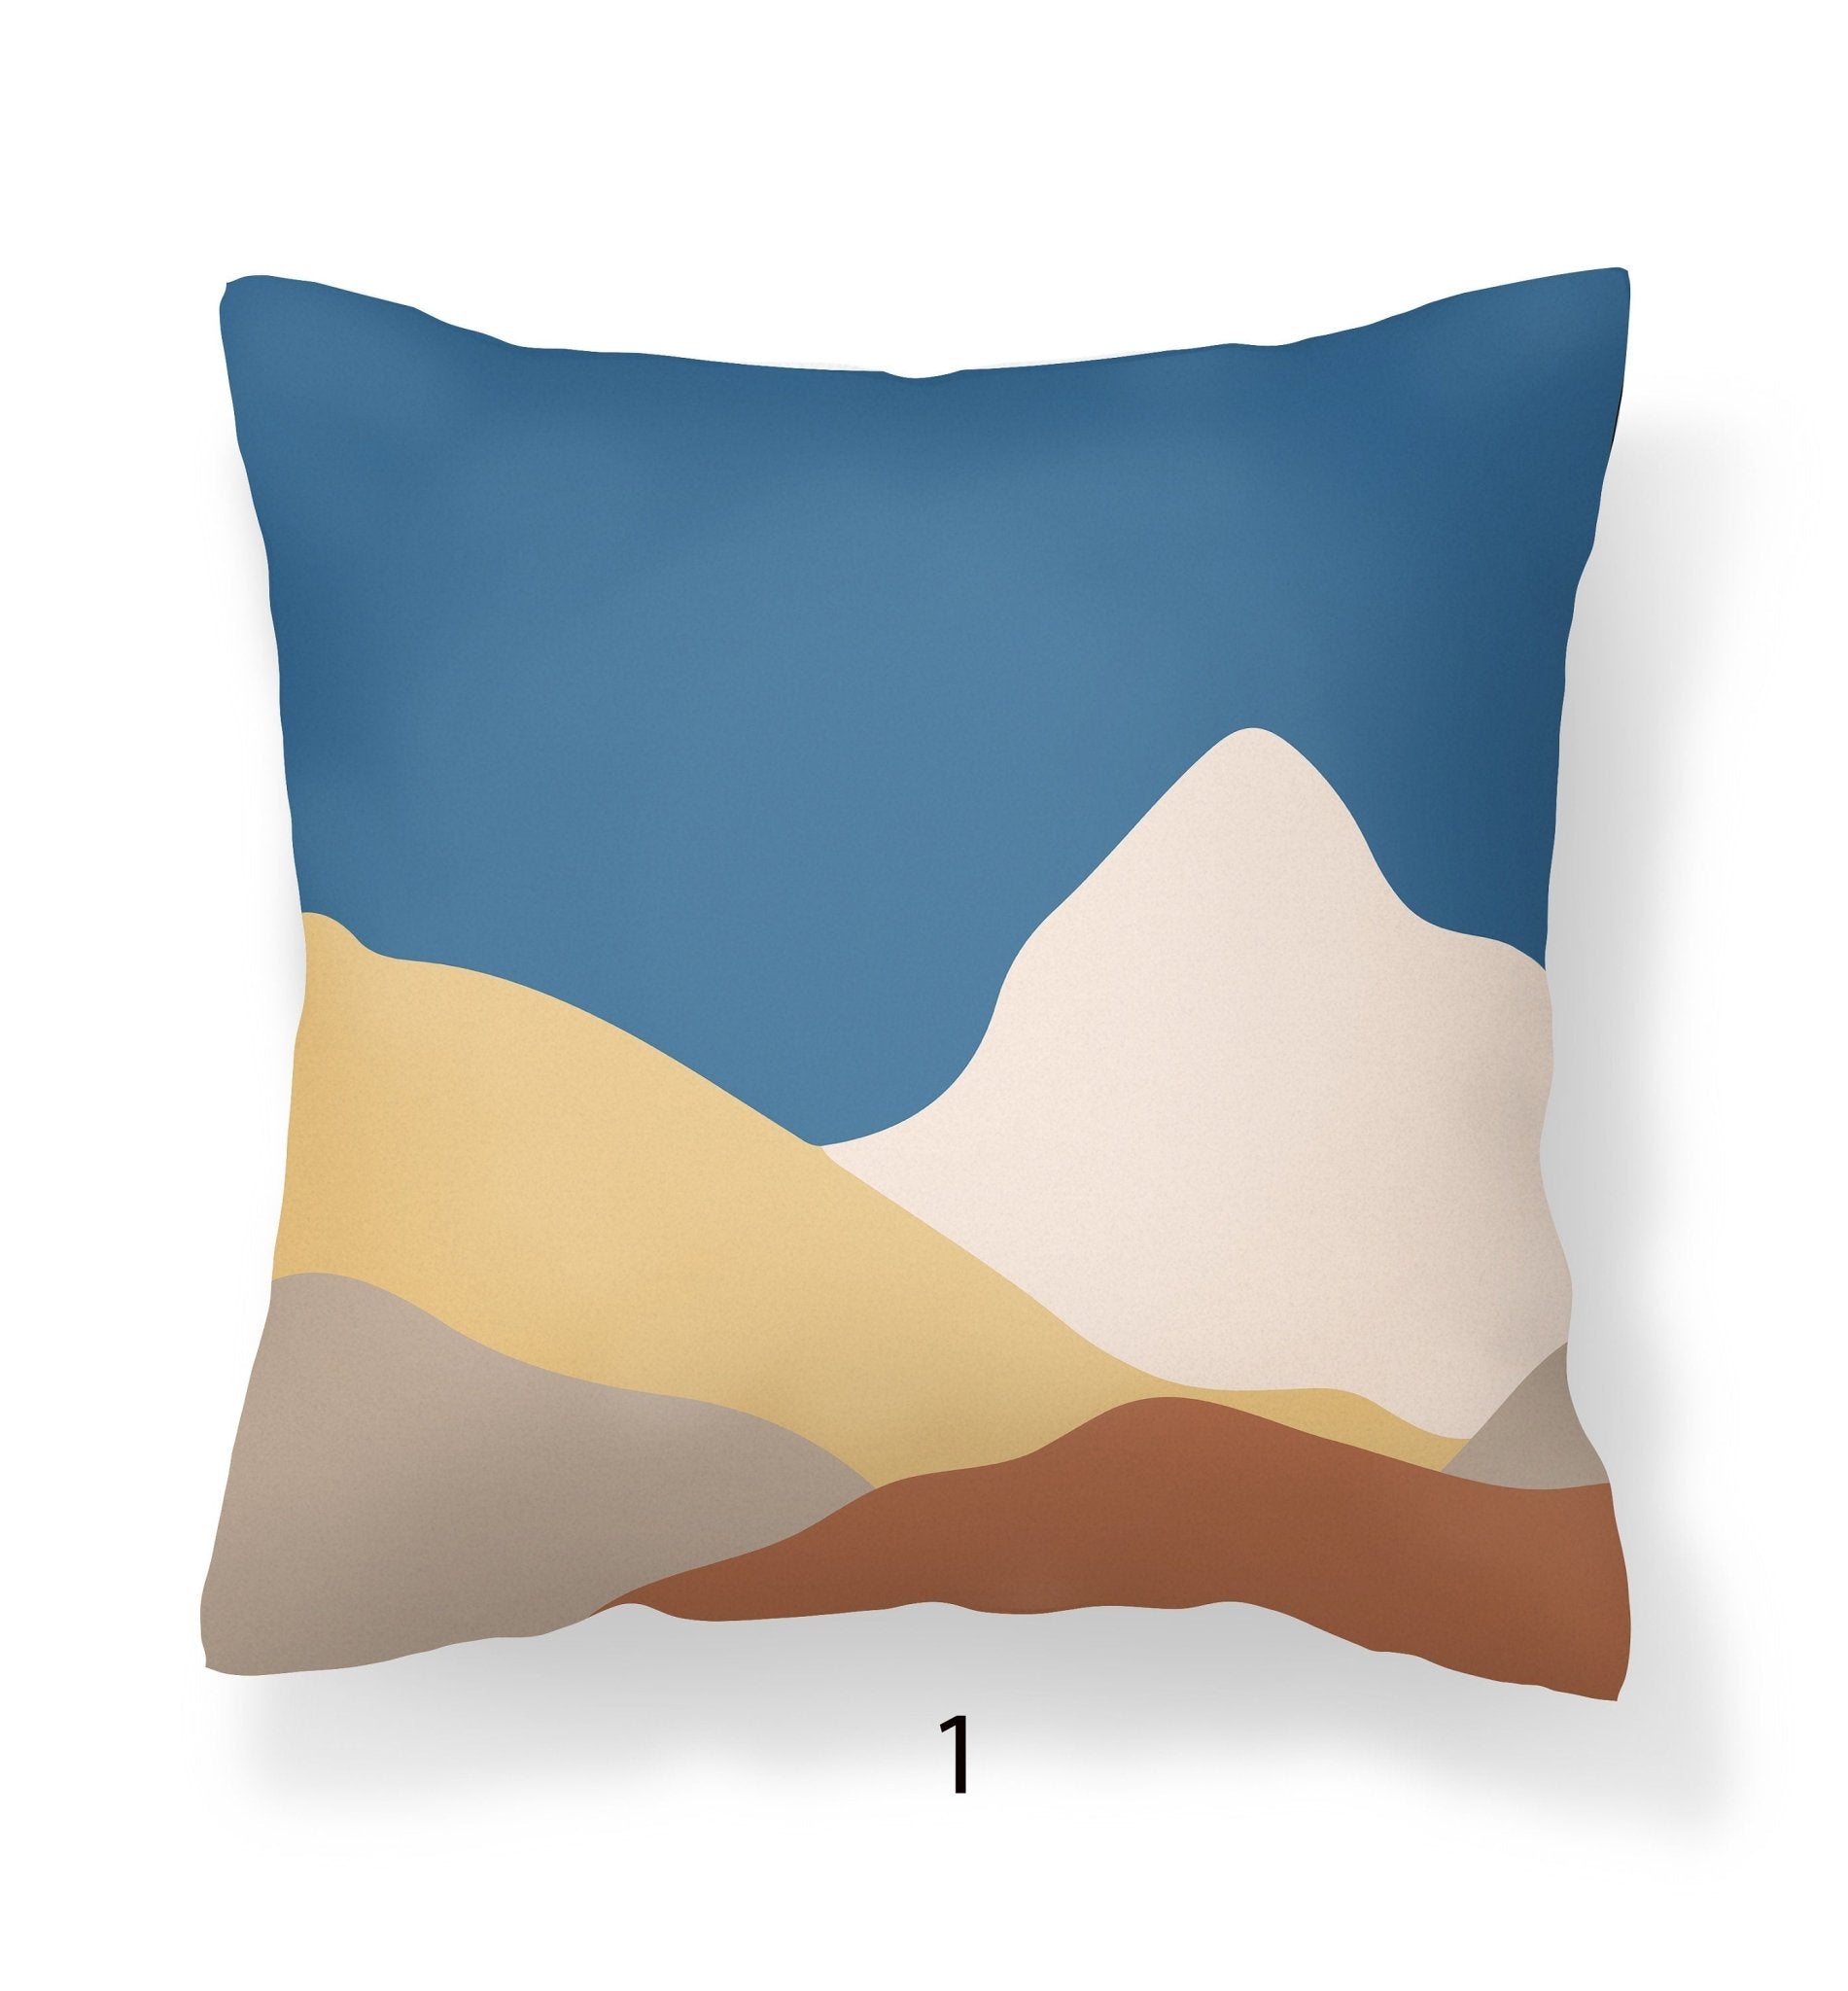 Cushion Covers and Decorative Throw Pillows by Studio Covers